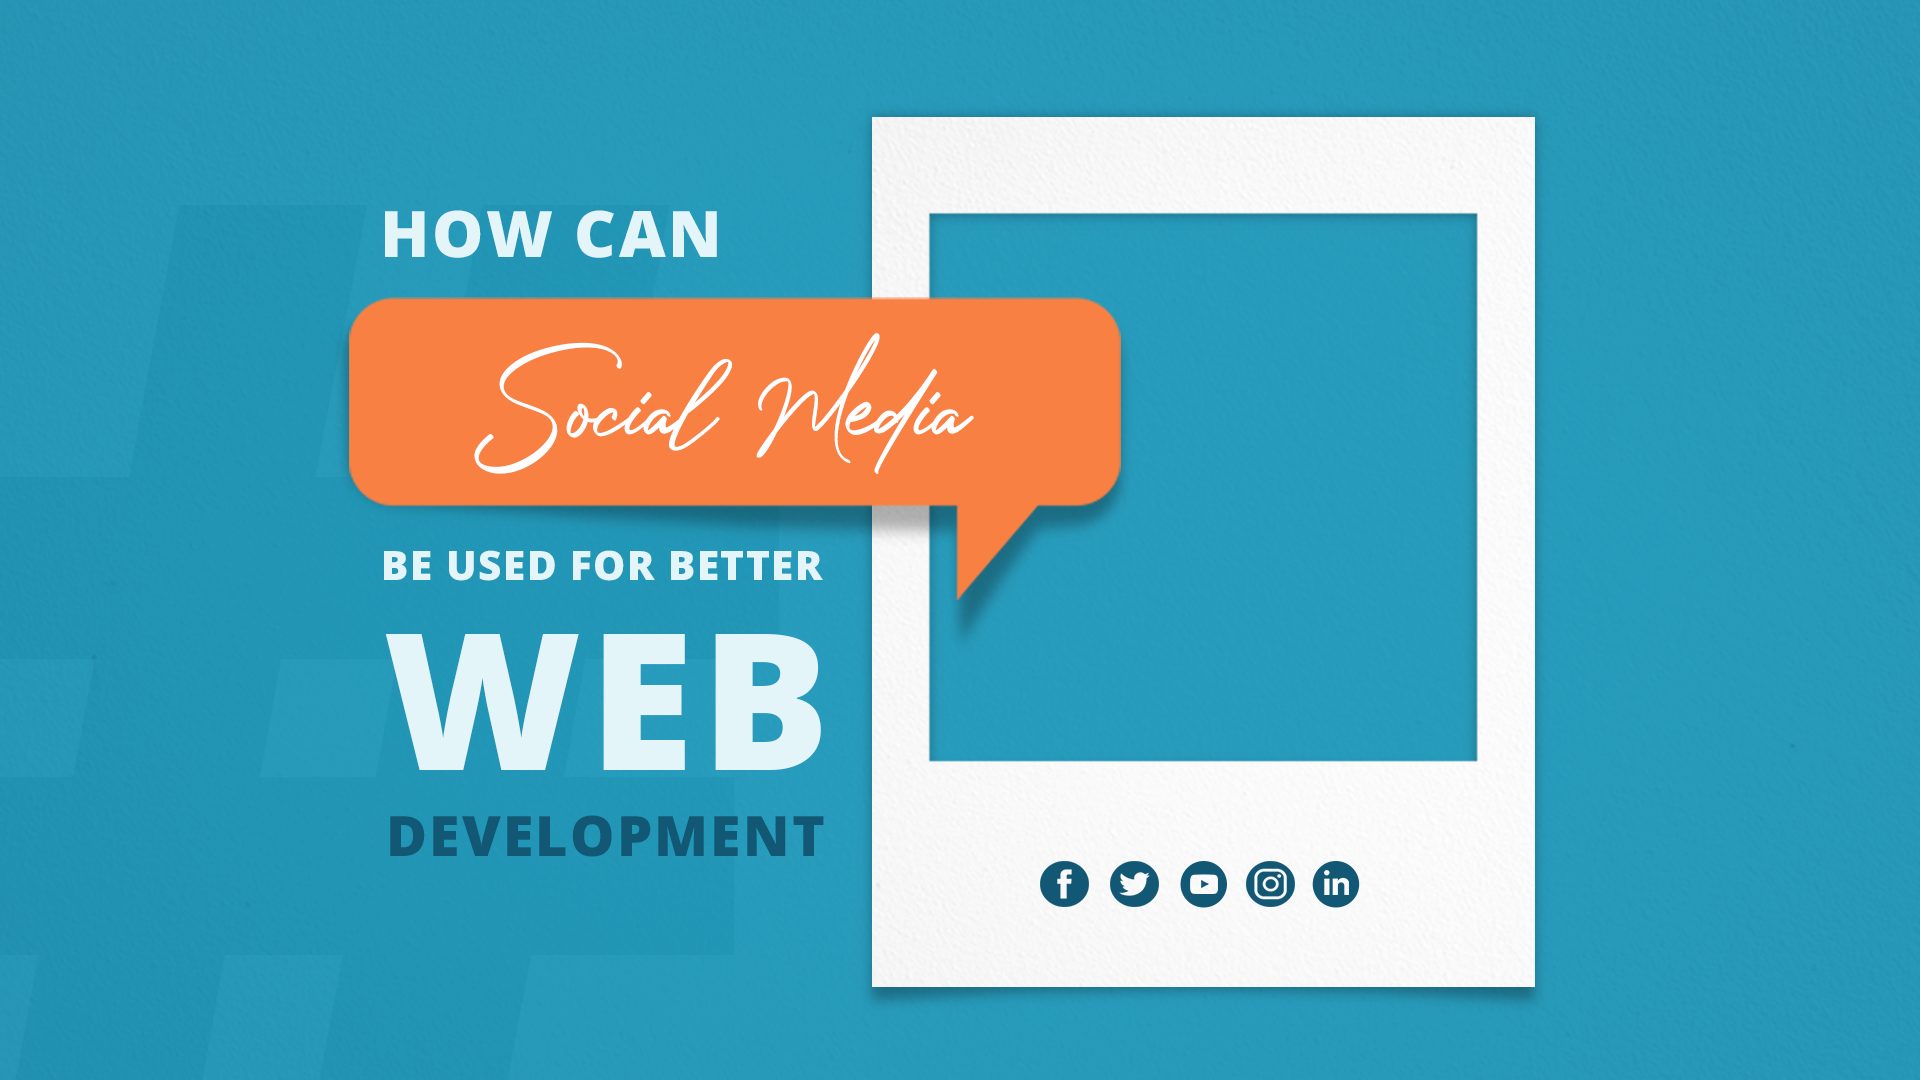 How Can Social Media Services Be Used For Better Web Development?